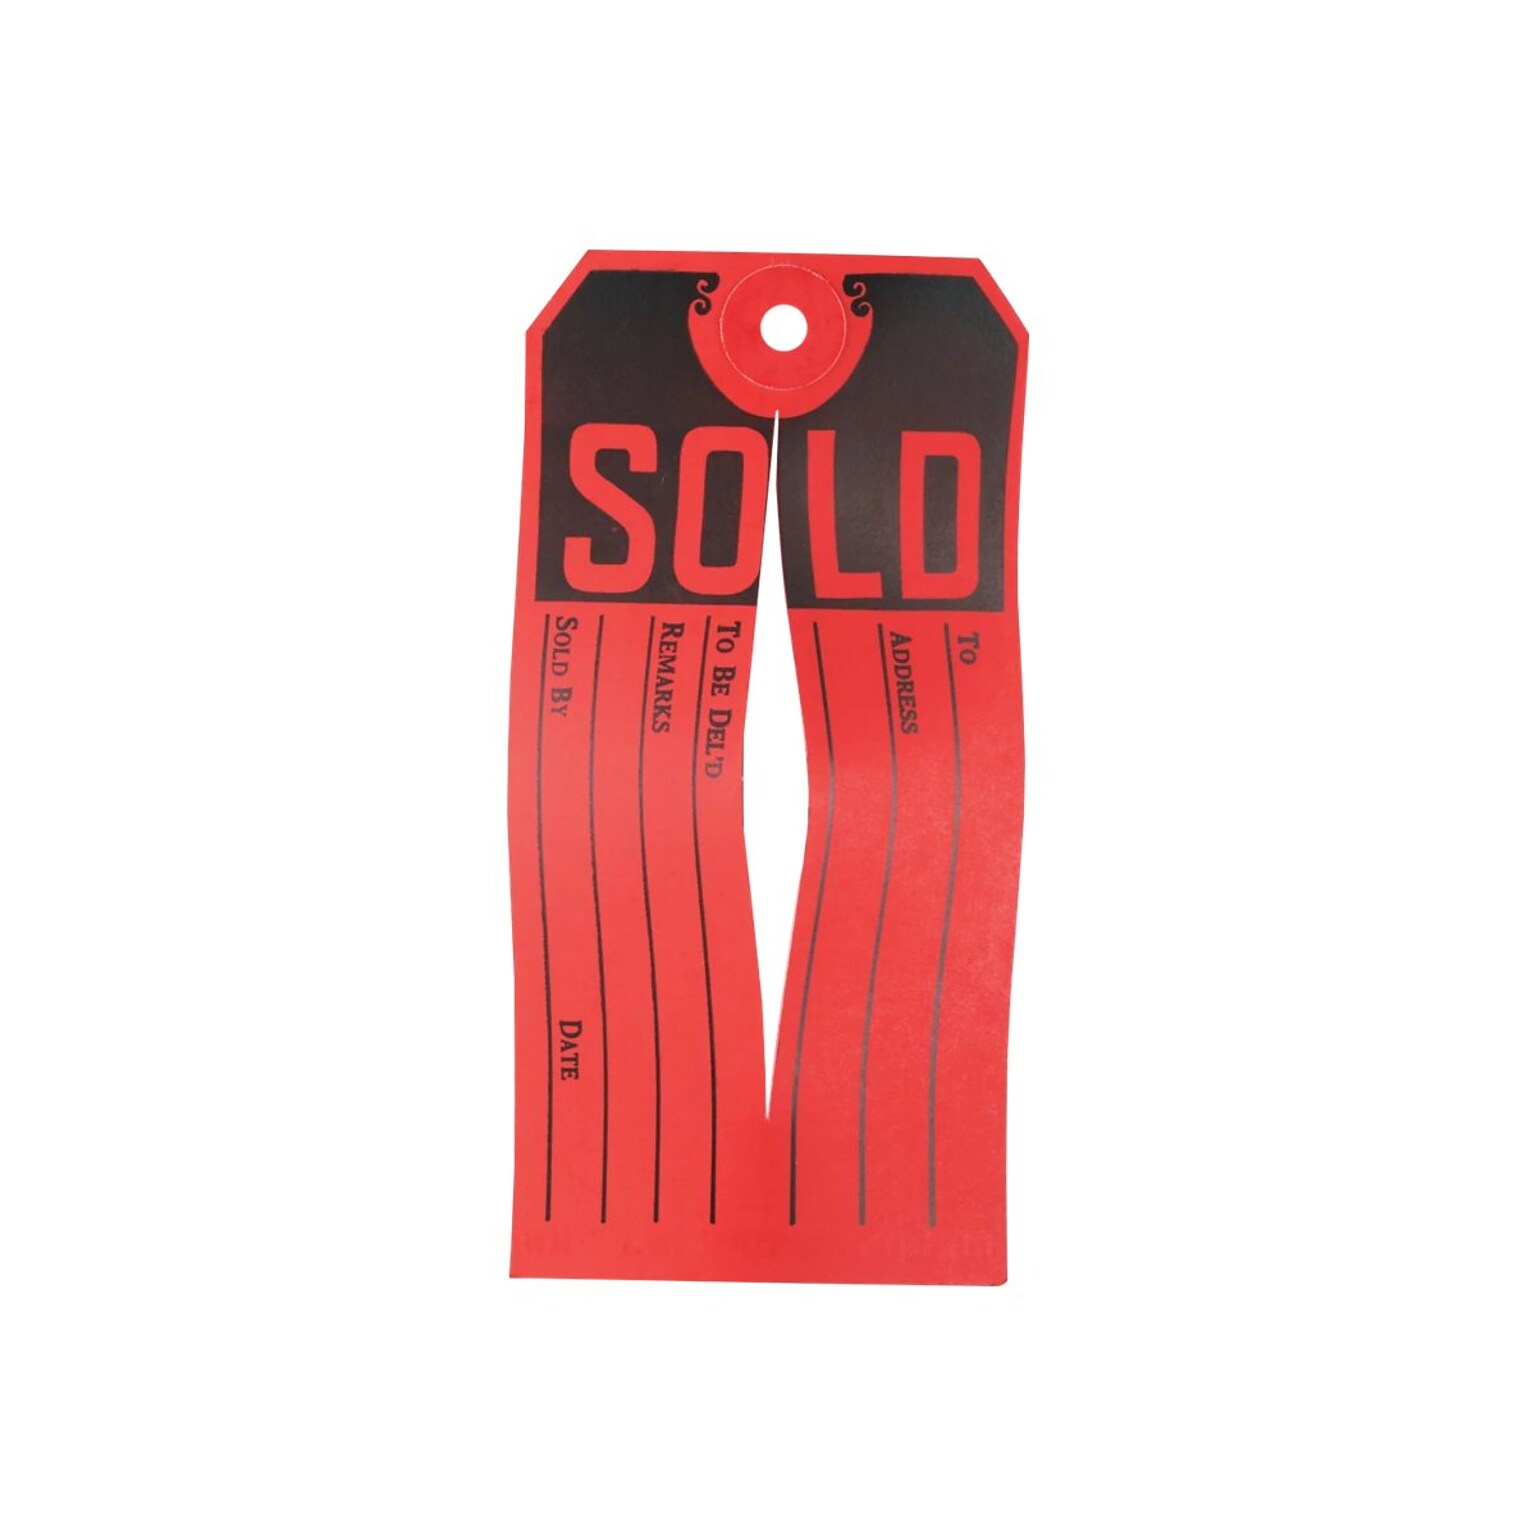 Avery 4.75 Sold Sale & Clearance Tags, Red/Black, 500/Bx (15161)